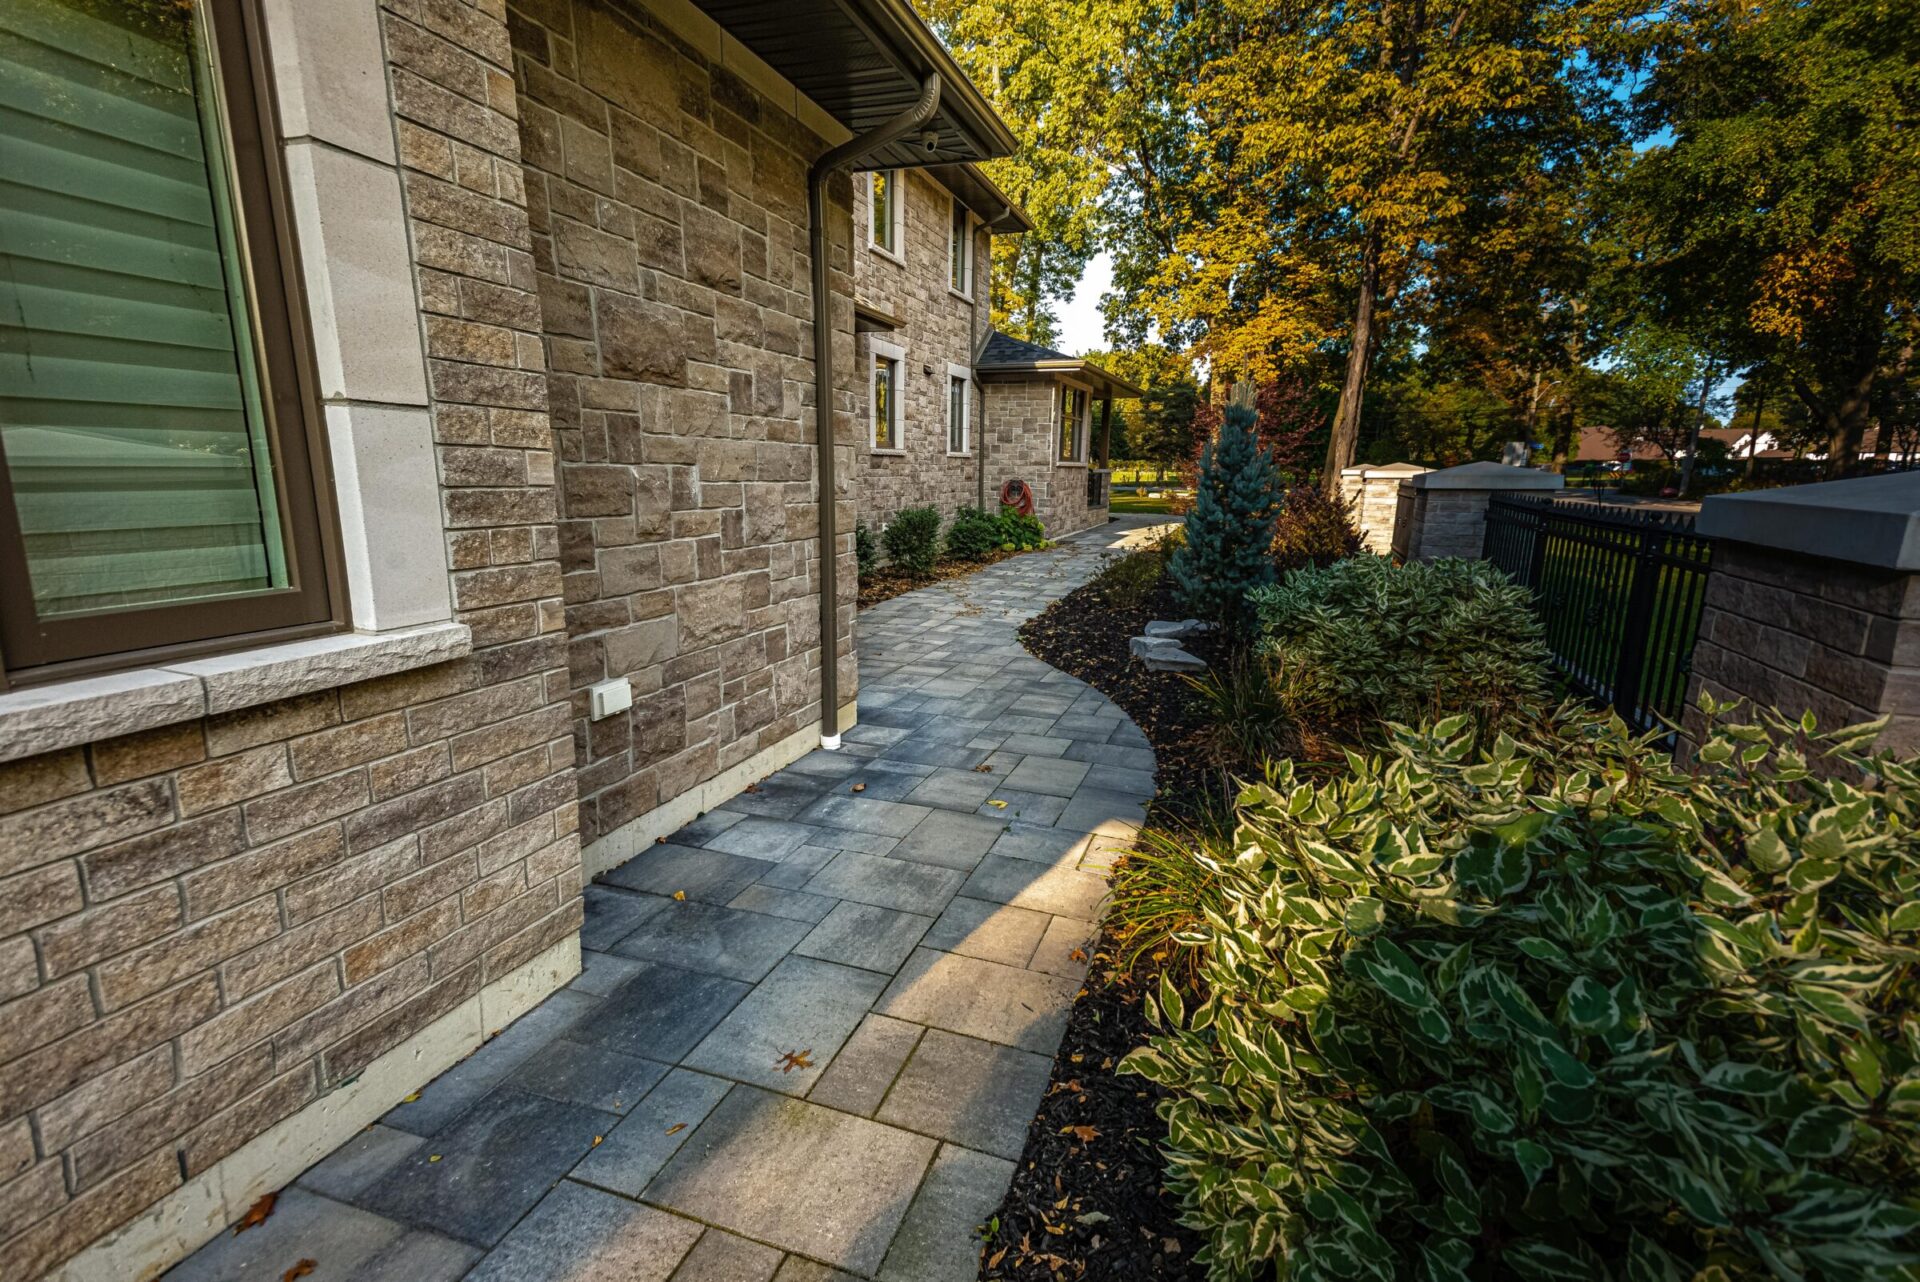 A winding stone pathway leads to a house with brick walls, framed by greenery and a clear sky, showcasing a landscaped residential outdoor space.